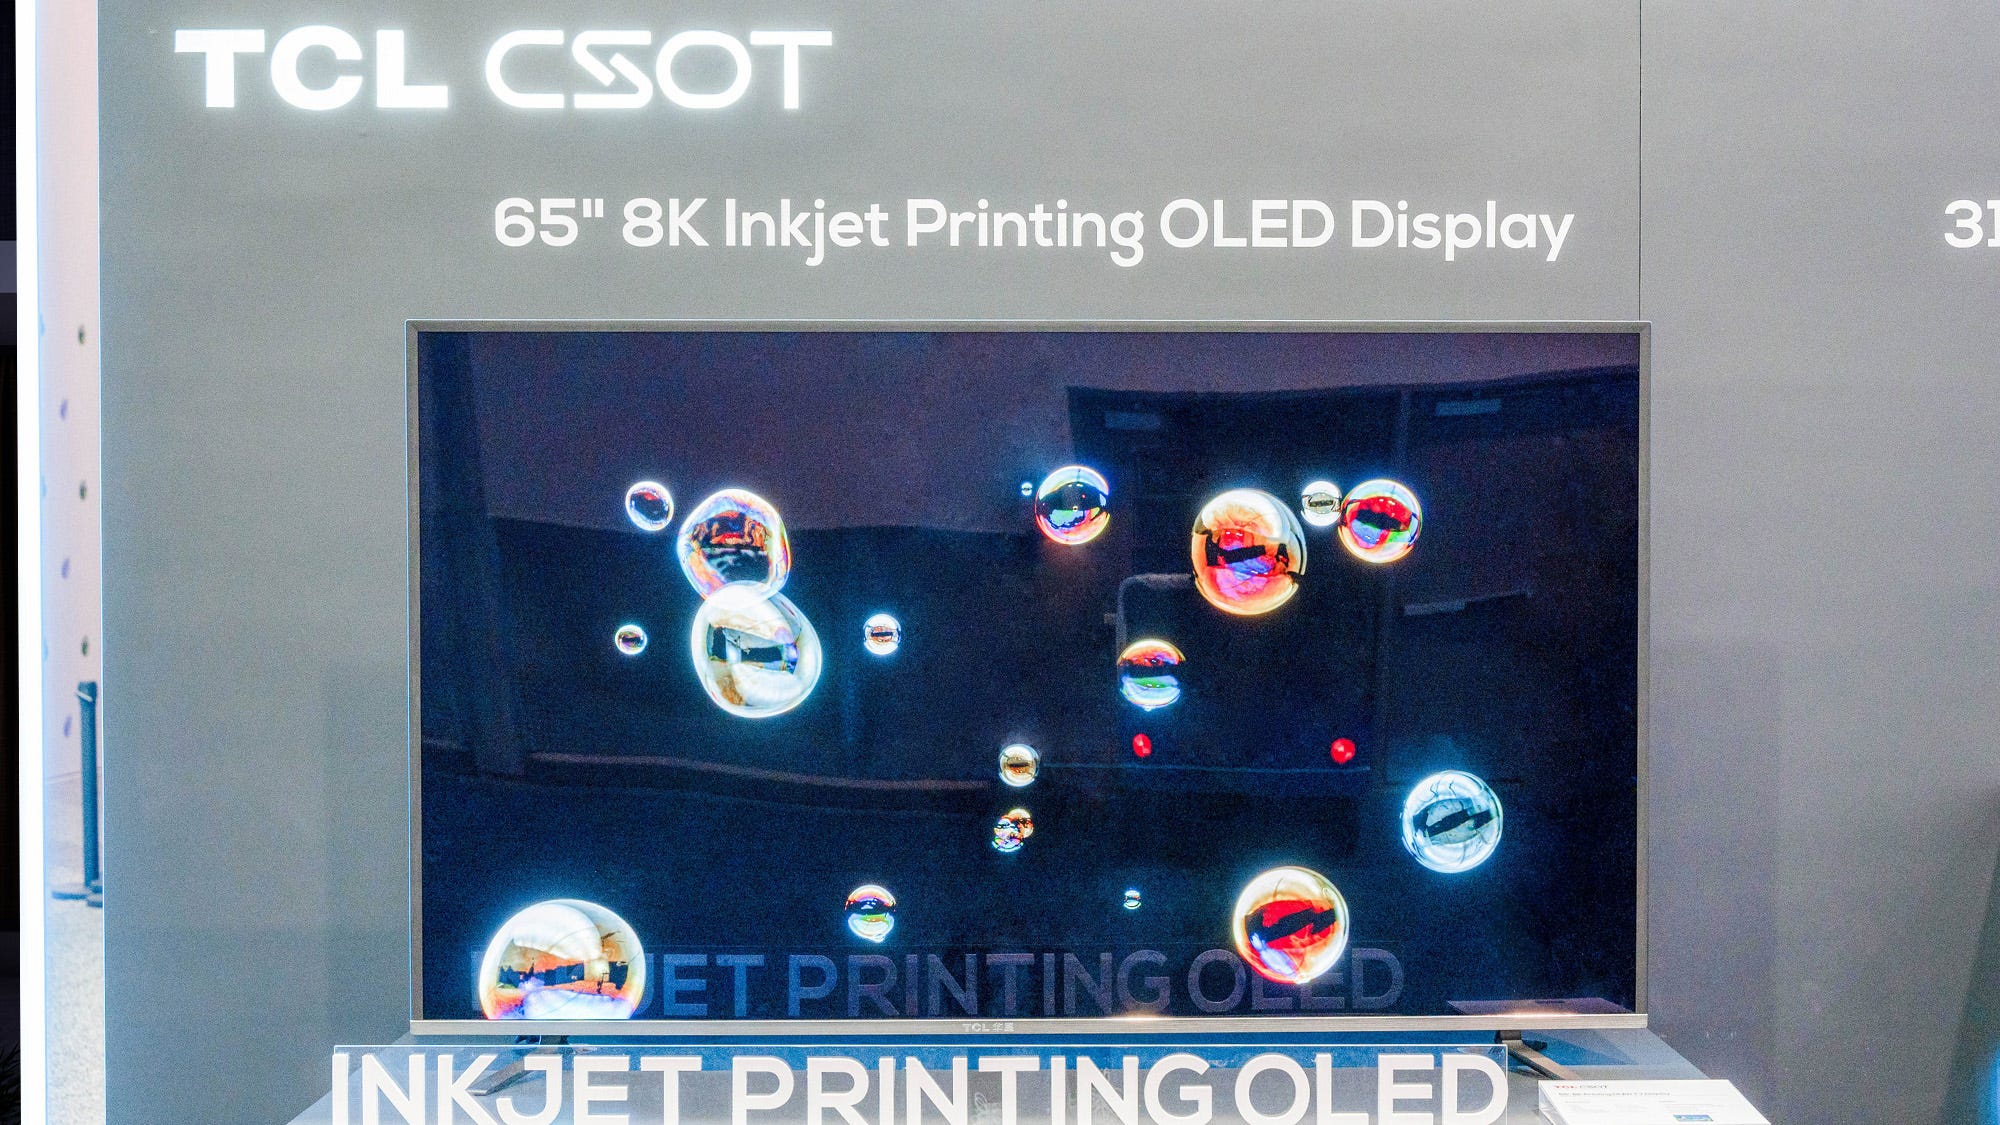 TCL showcased an inkjetprinted OLED TV at CES 2023